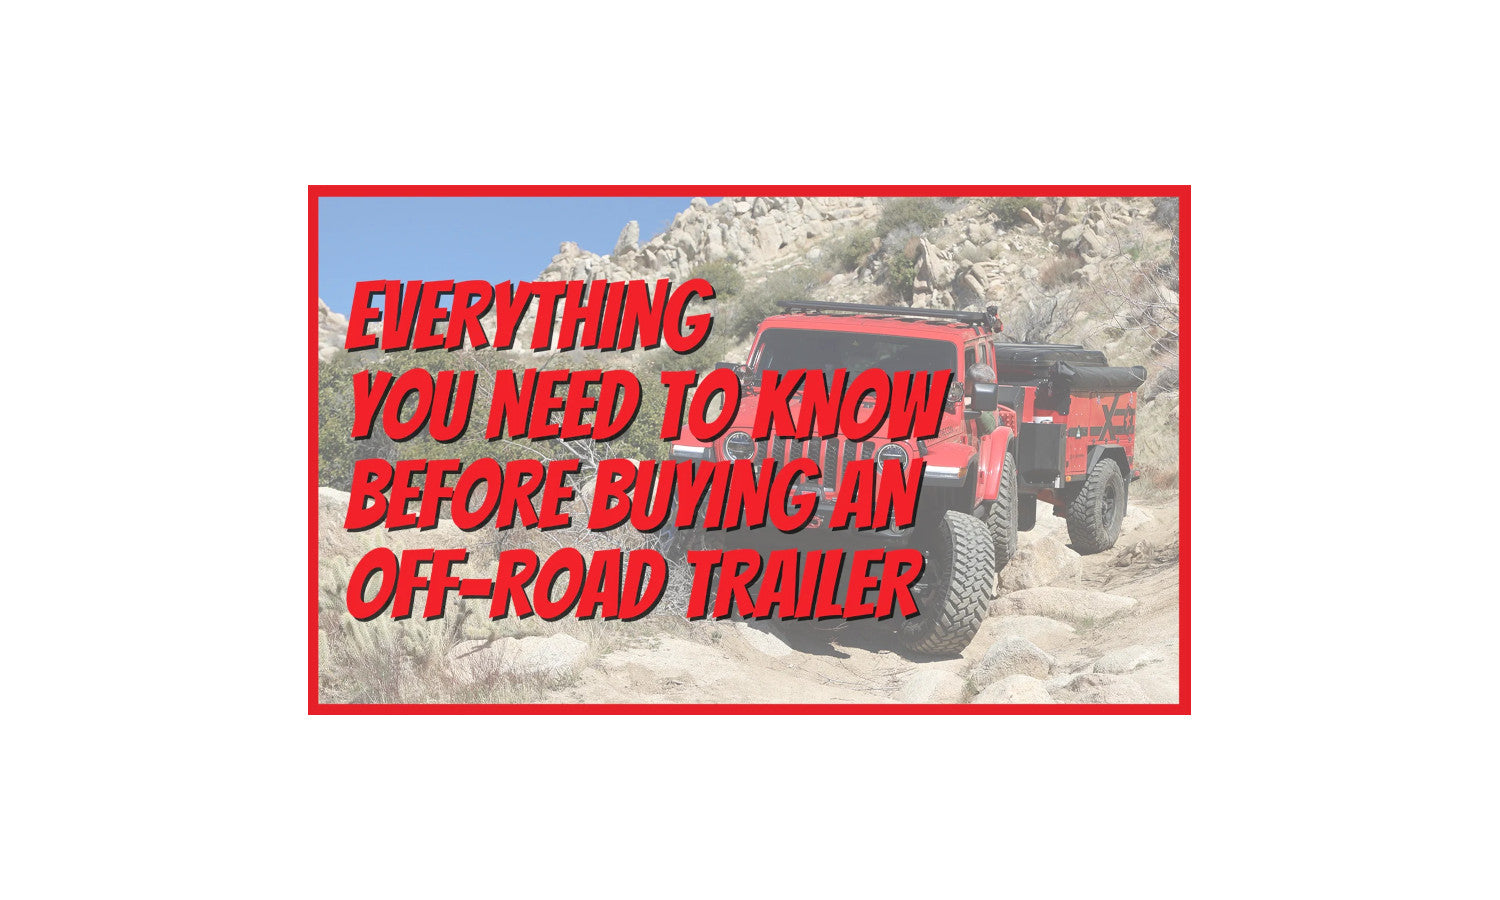 Everything You Need to Know Before Buying an Off-Road Trailer